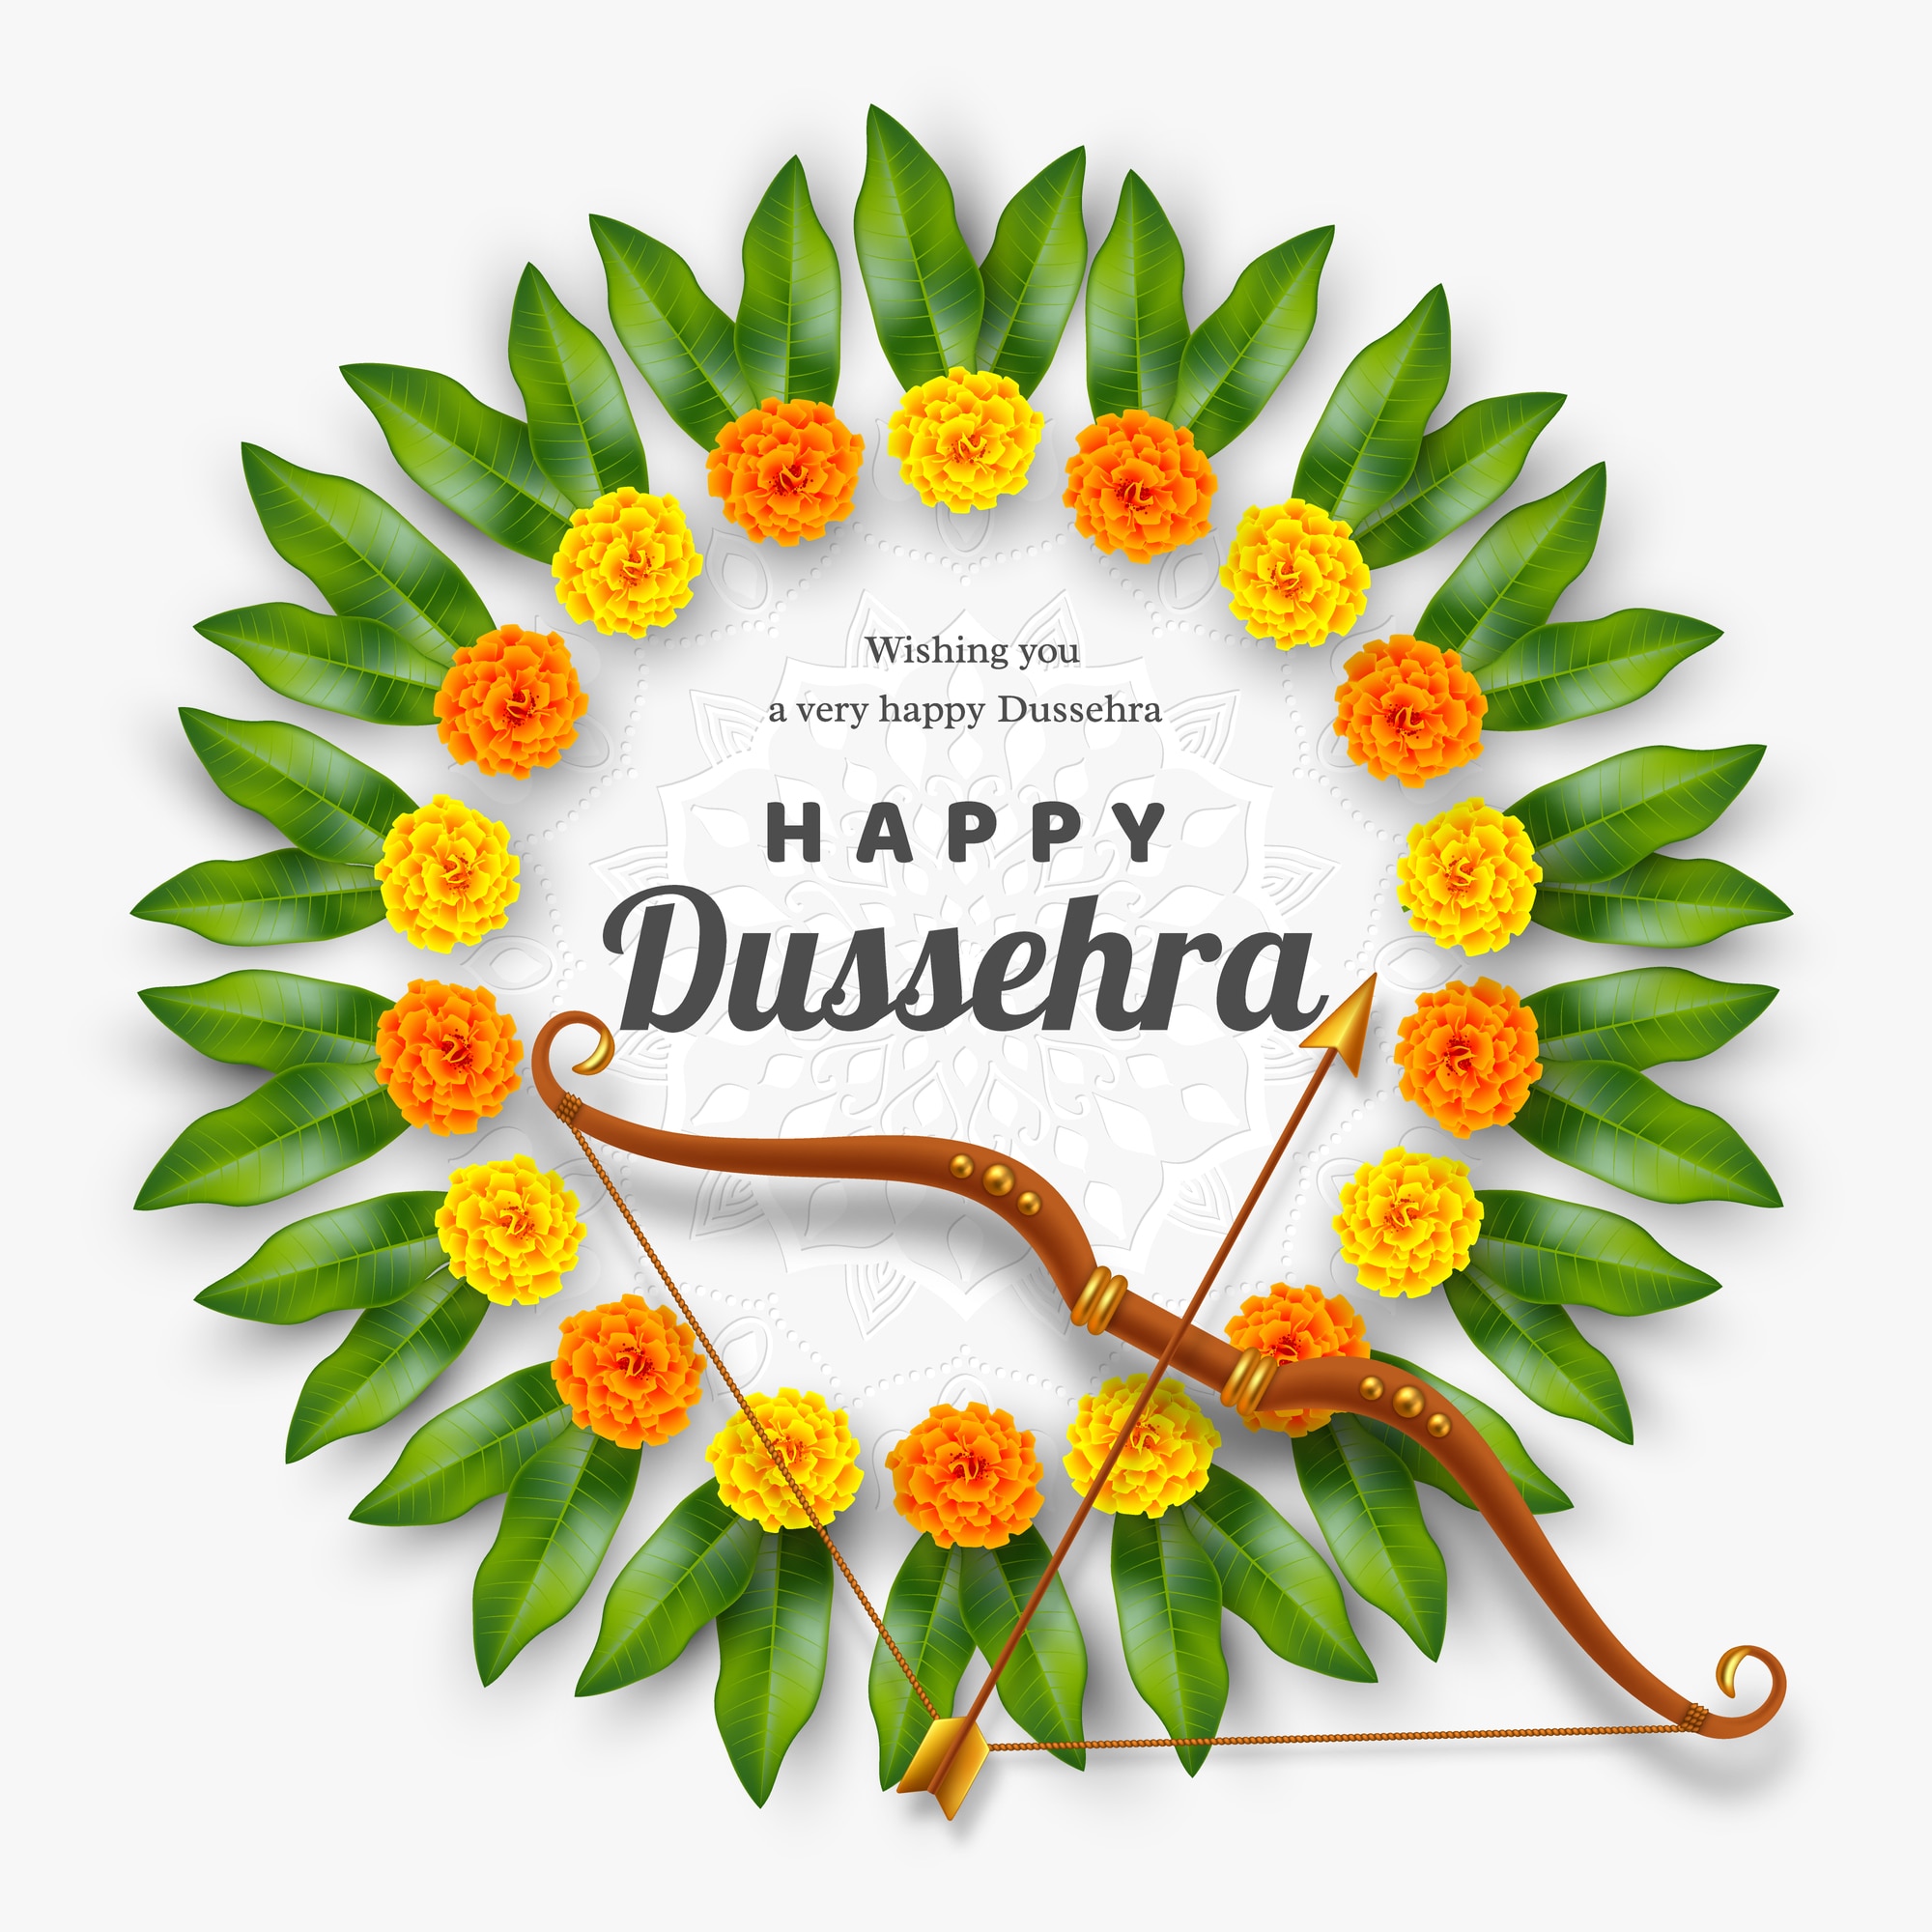 Wishing you all Happy Dussehra